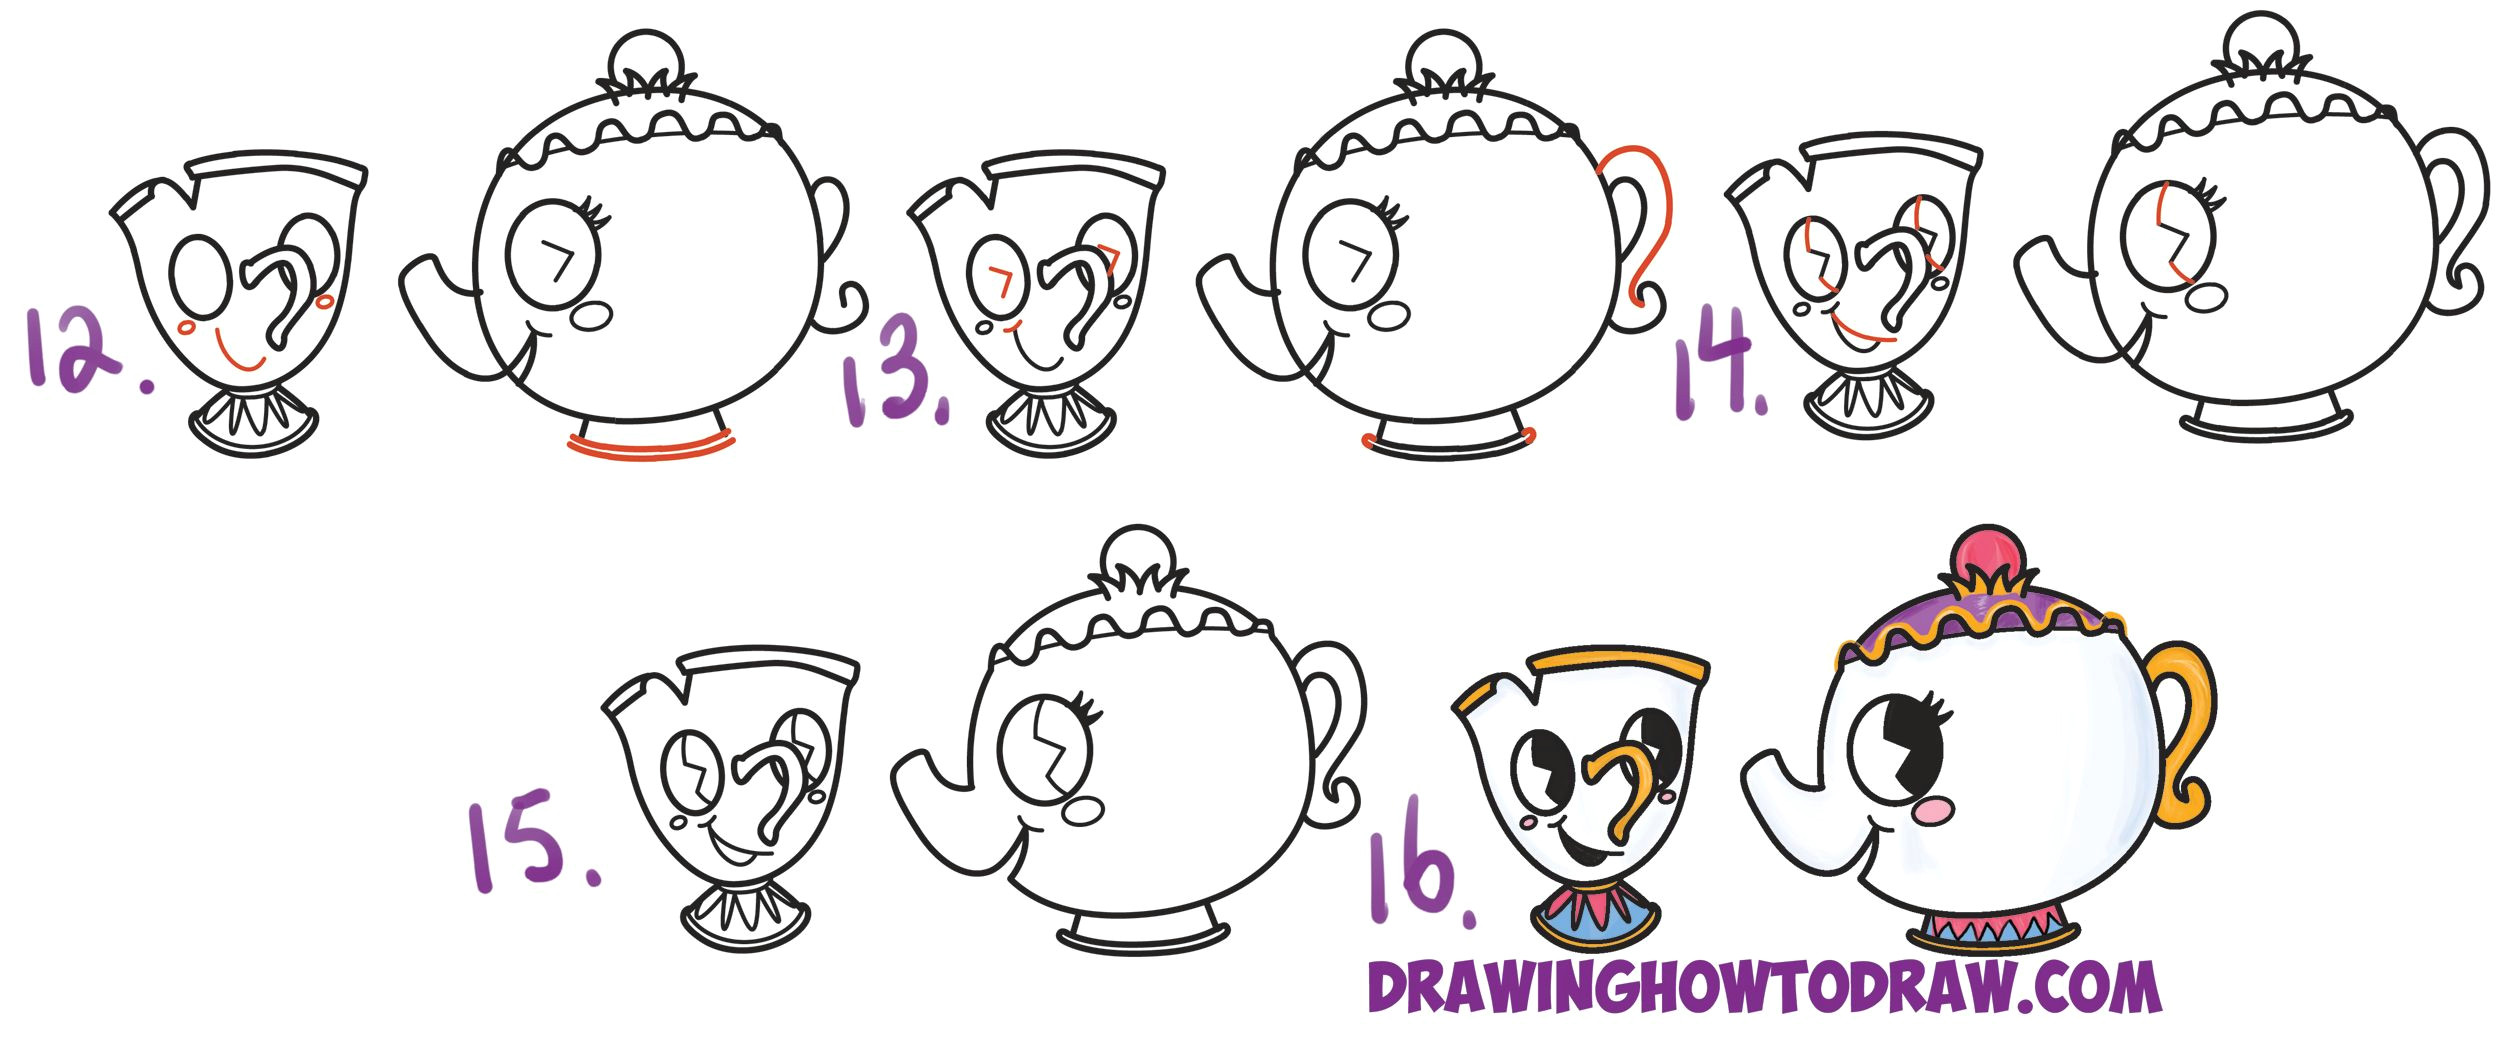 Easy Drawings Mulan How to Draw Cute Kawaii Chibi Mrs Potts and Chip From Beauty and